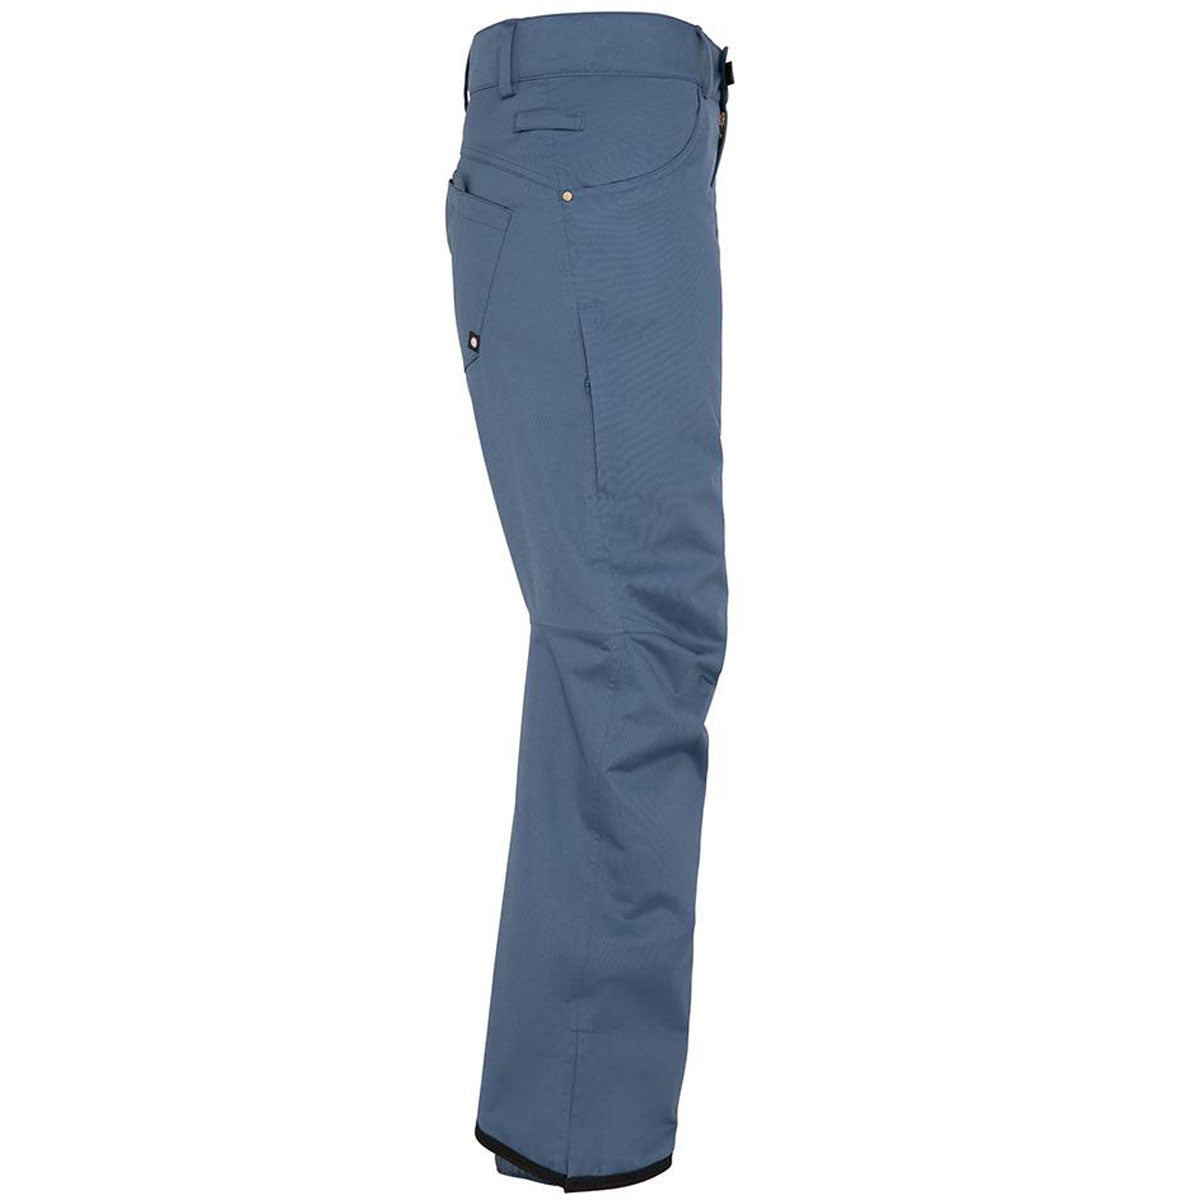 686 Womens Mid-Rise Insulated Snowboard Pants - Vintage Navy image 4